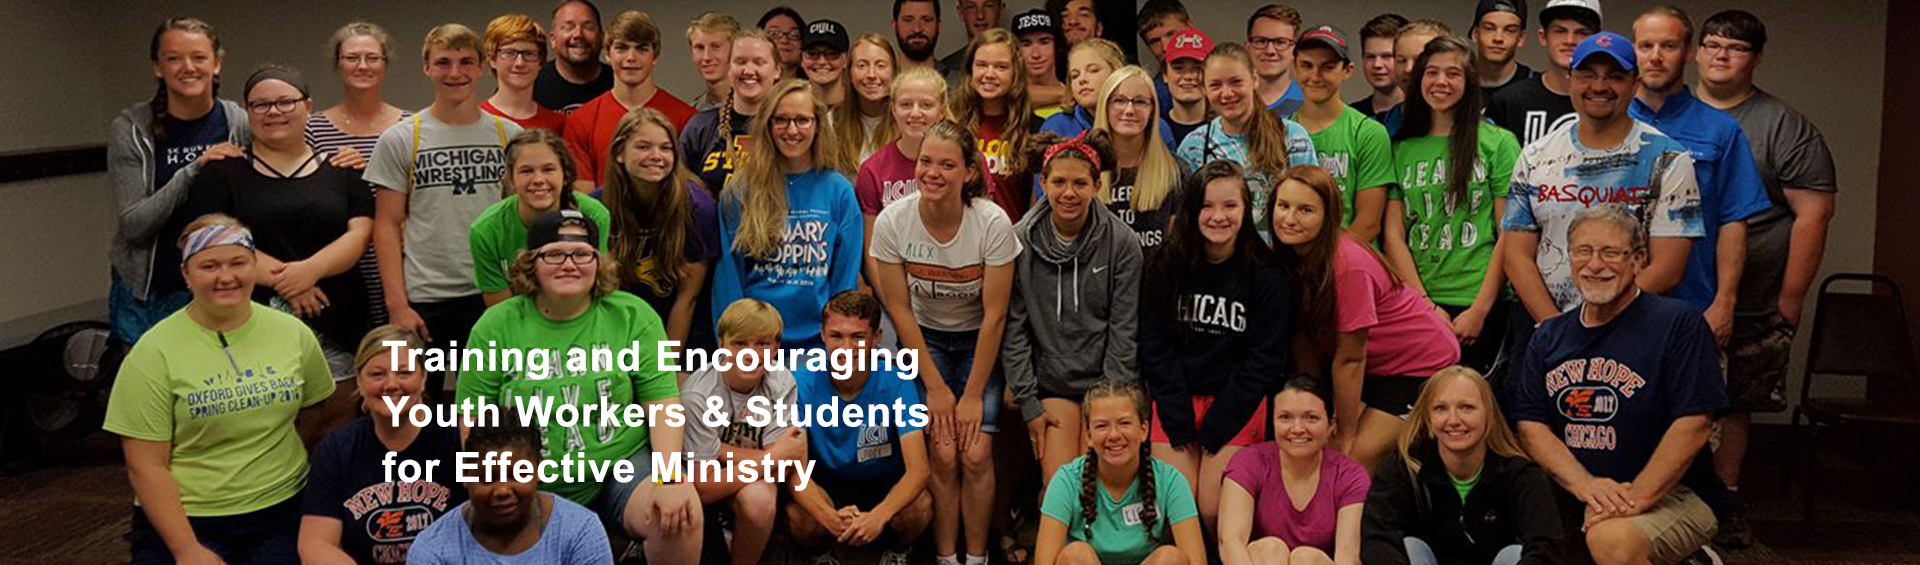 Training and Encouraging Youth Workers & Students for Effective Ministry